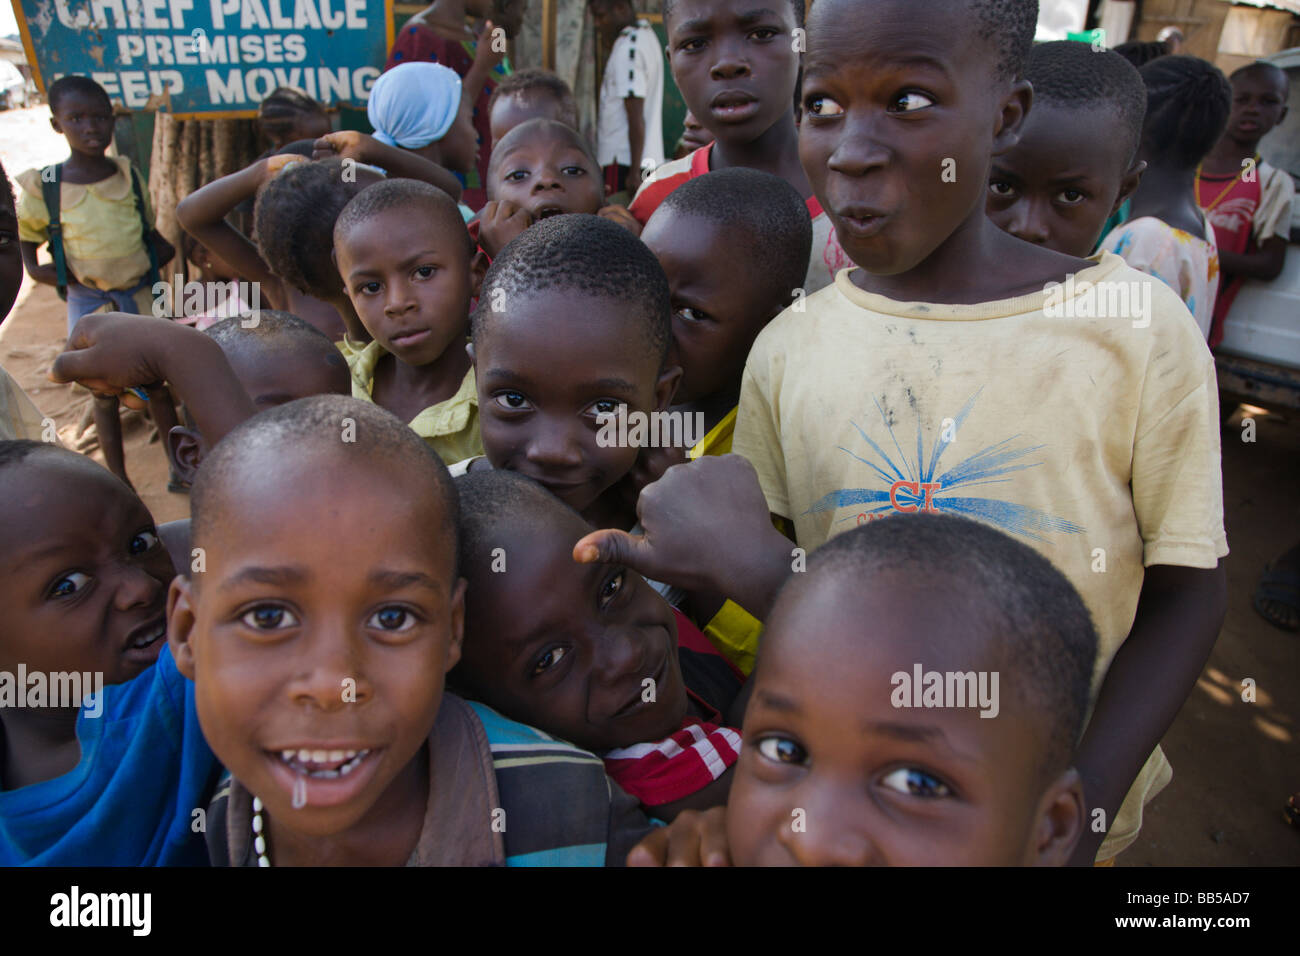 Children Crowd Up To The Camera In The Durumi Area Of Abuja Nigeria